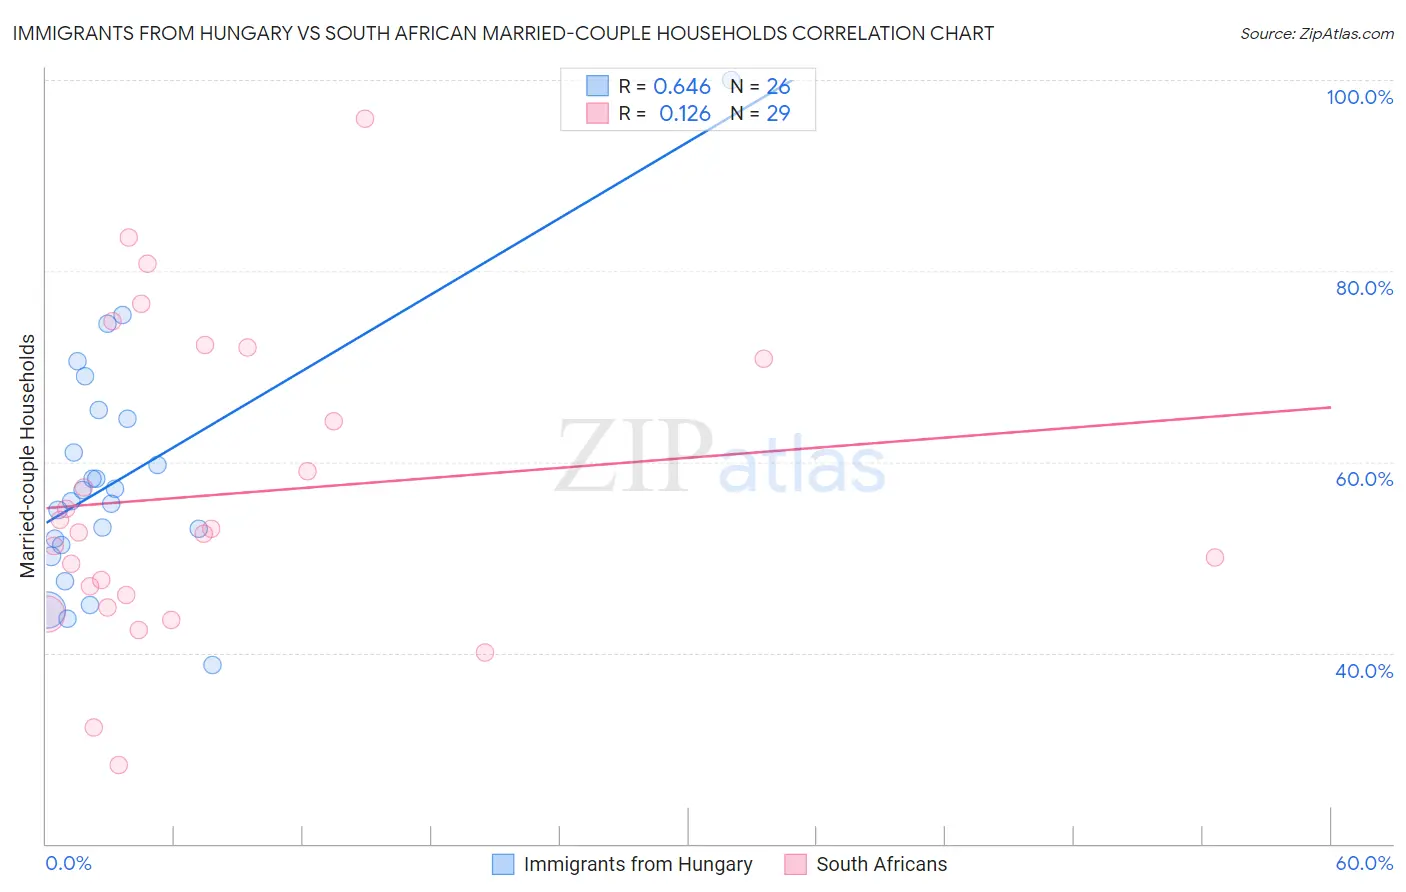 Immigrants from Hungary vs South African Married-couple Households